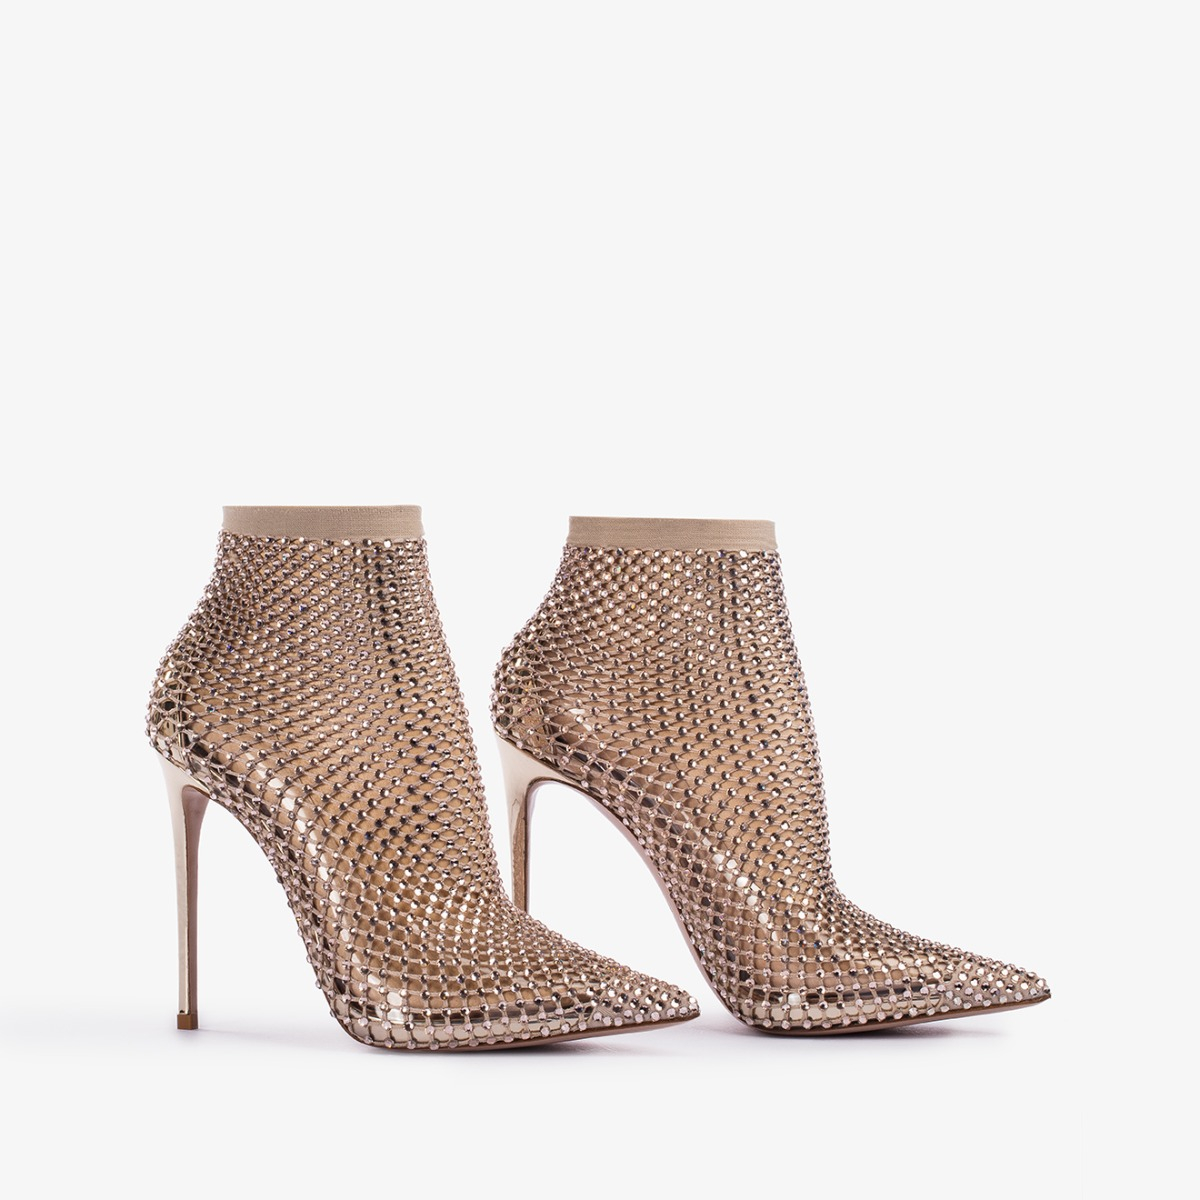 GILDA ANKLE BOOT 120 mm - Le Silla | Official Online Store